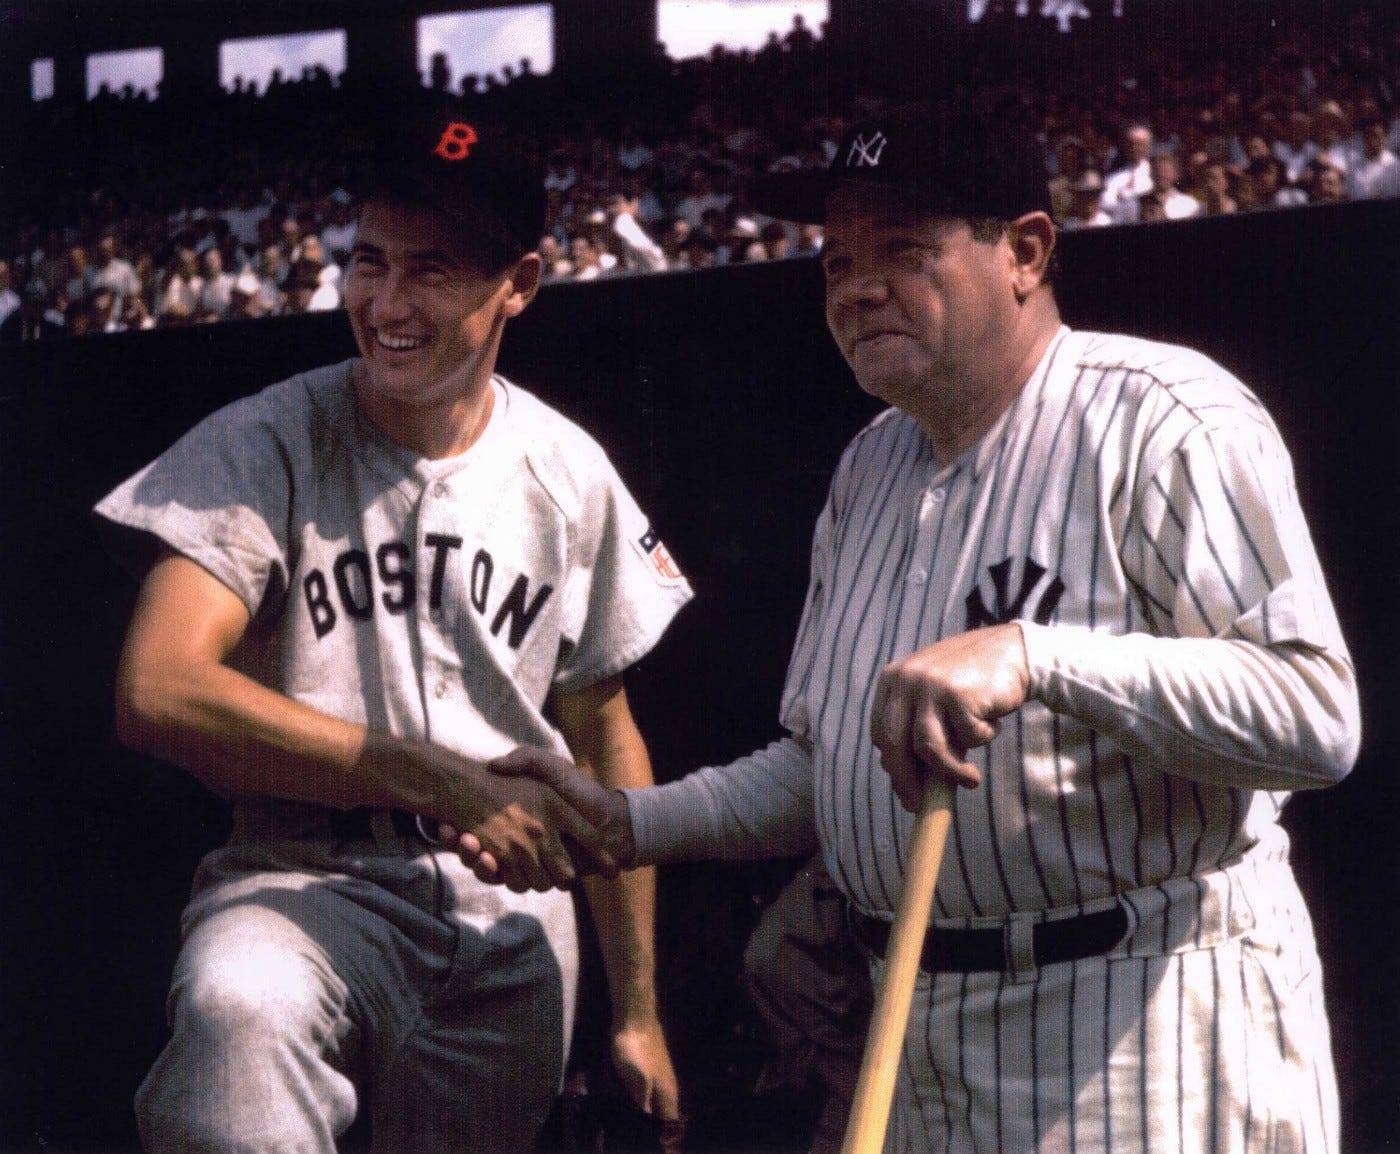 From the Archive: Babe Ruth hit for Sox in Houston. So did Ted Williams and  Yaz. Here's the story, by Gordon Edes